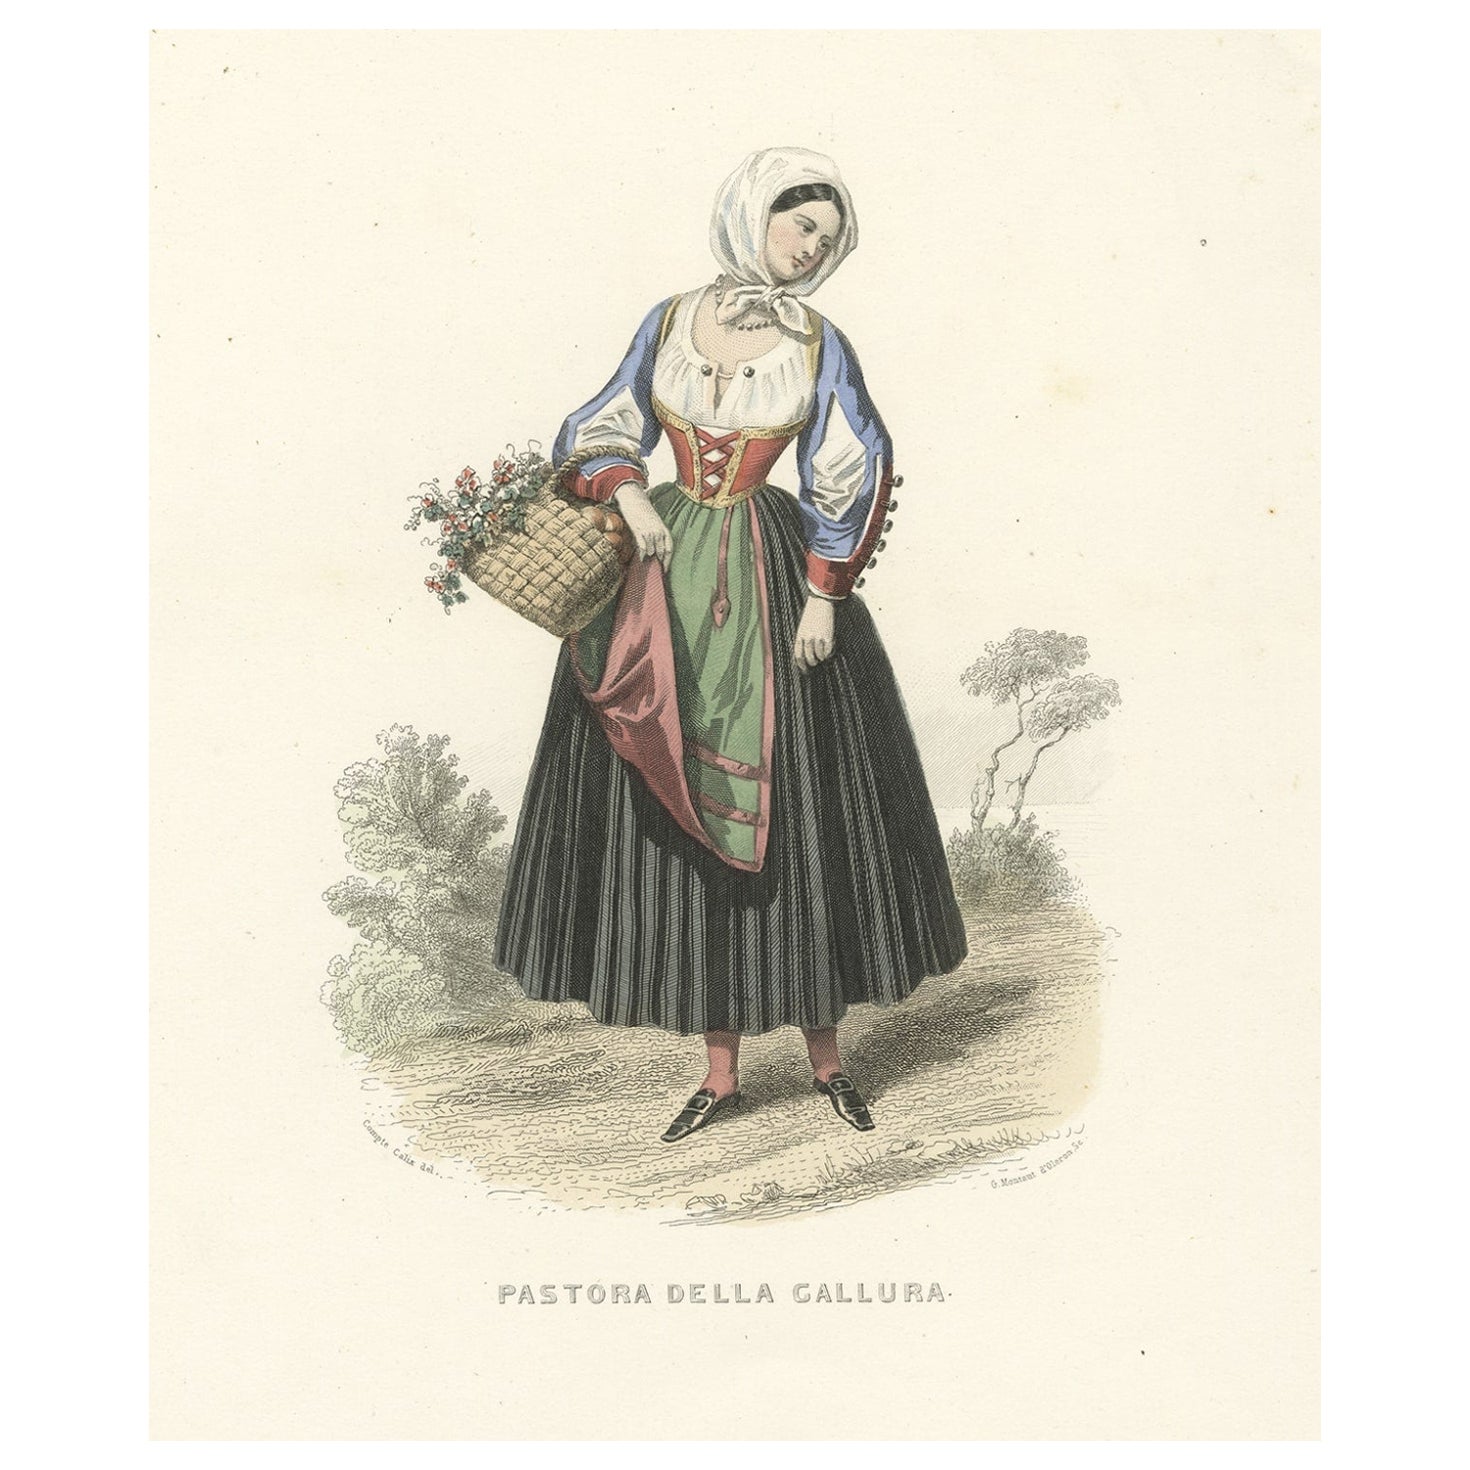 Antique Print of a Lady from Gallura in Sardinia, Italy, 1850